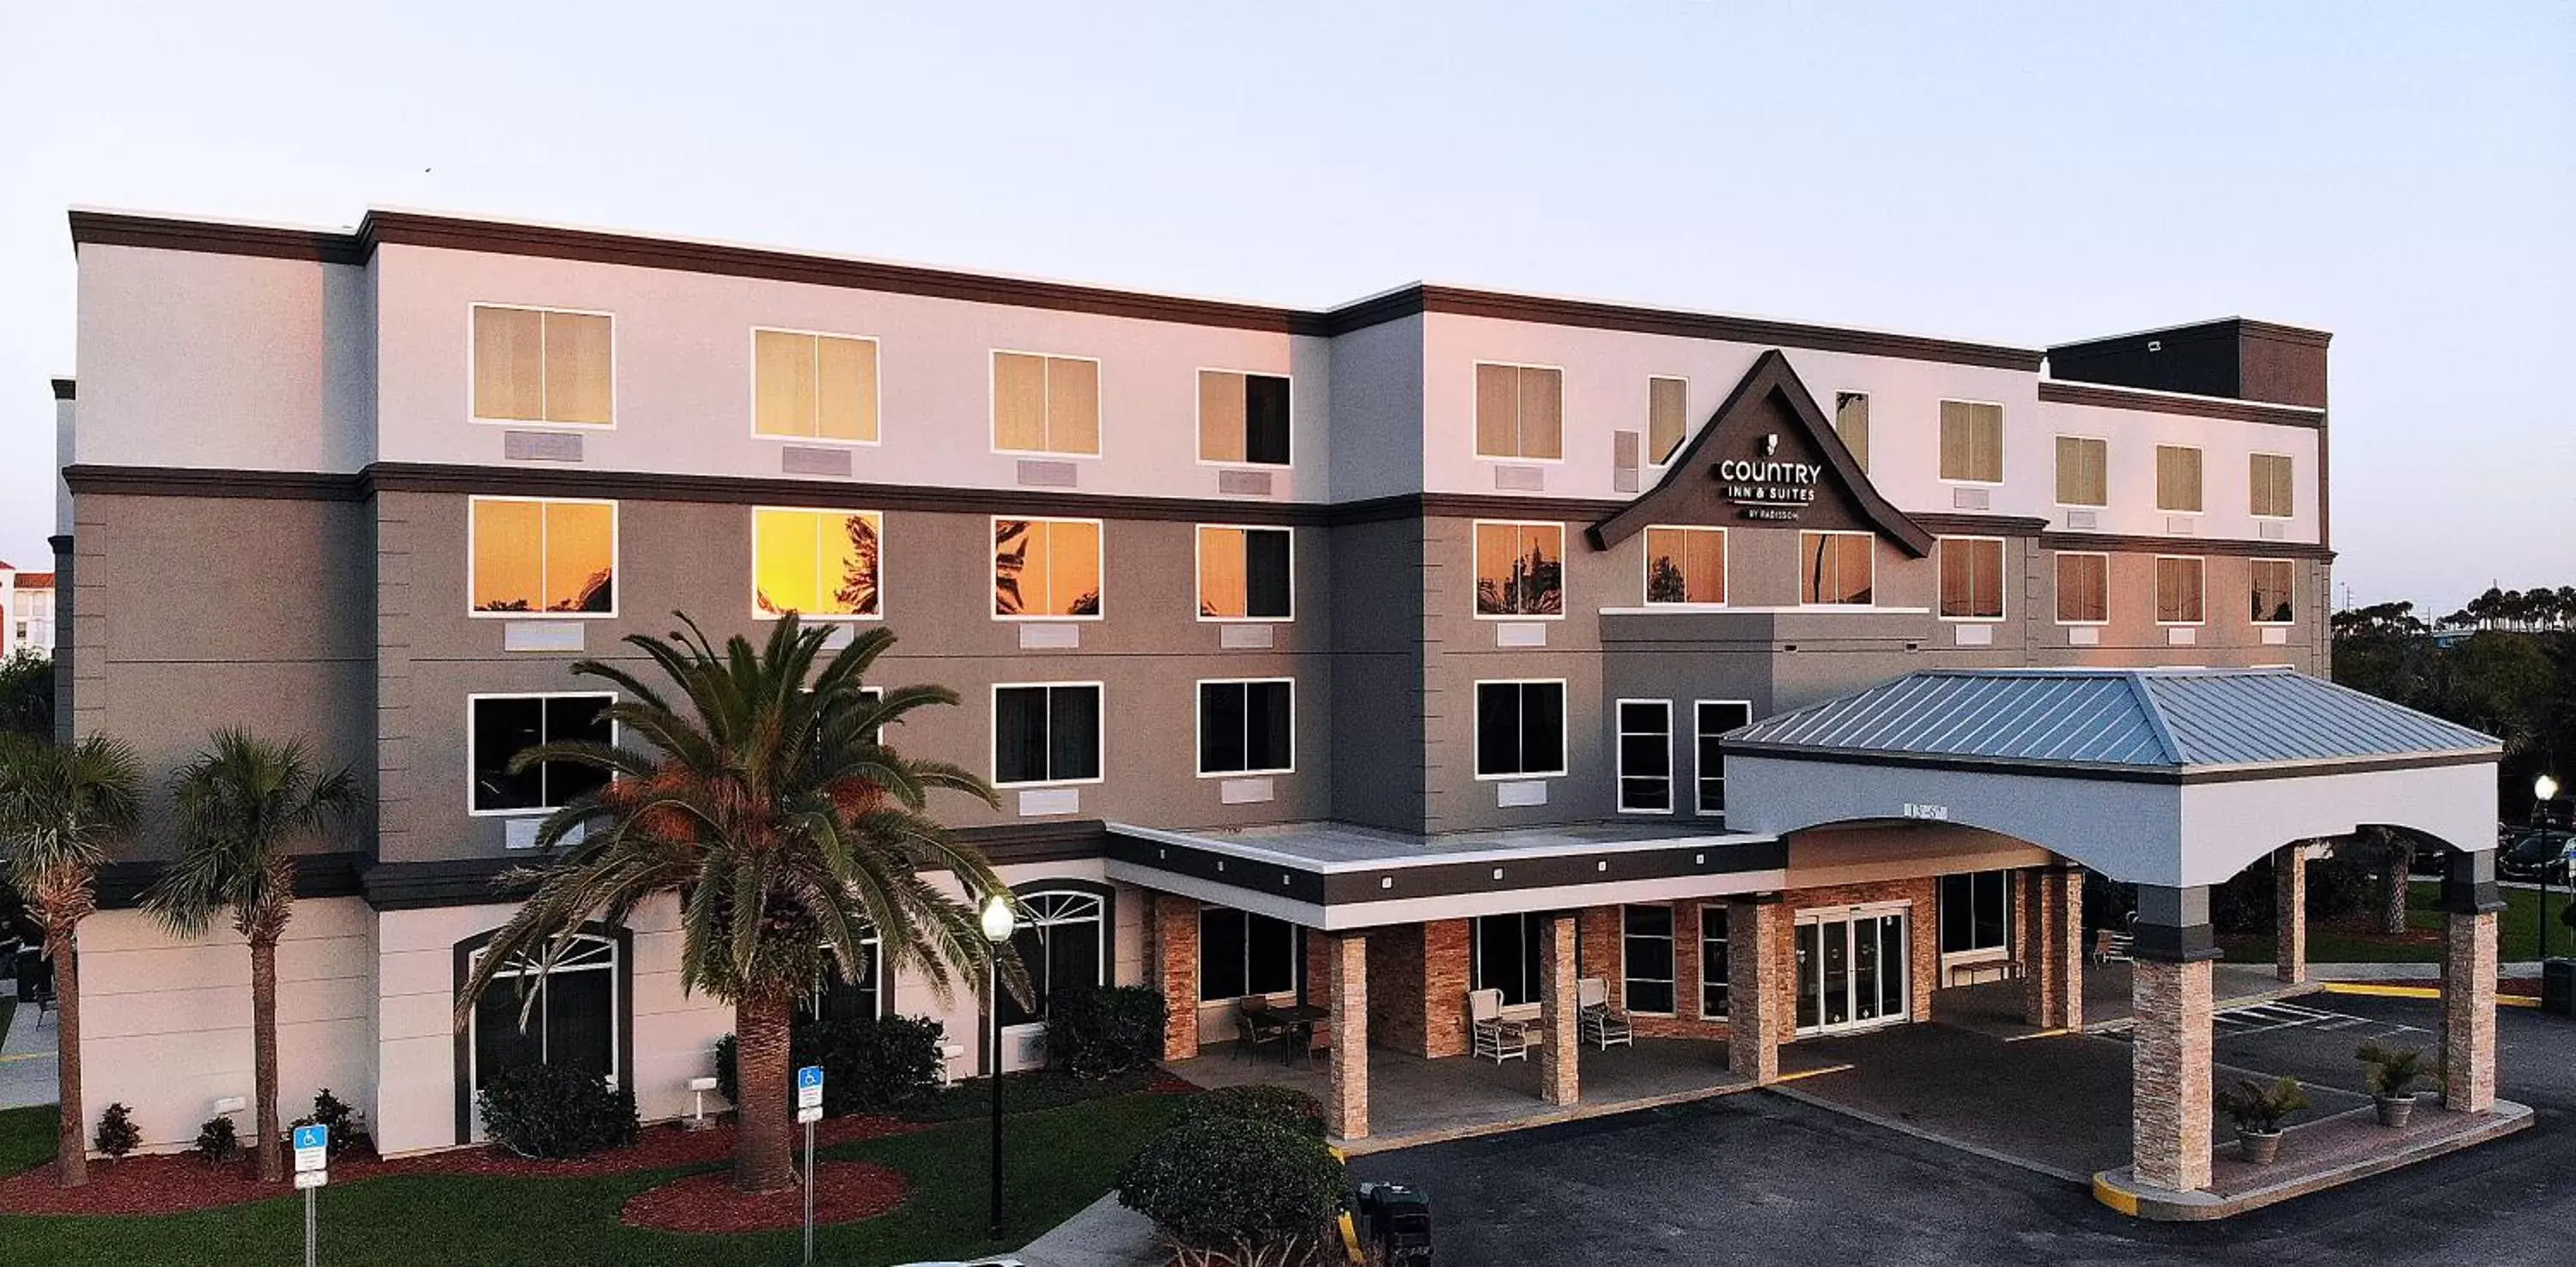 Facade/entrance, Property Building in Country Inn & Suites by Radisson, Port Canaveral, FL